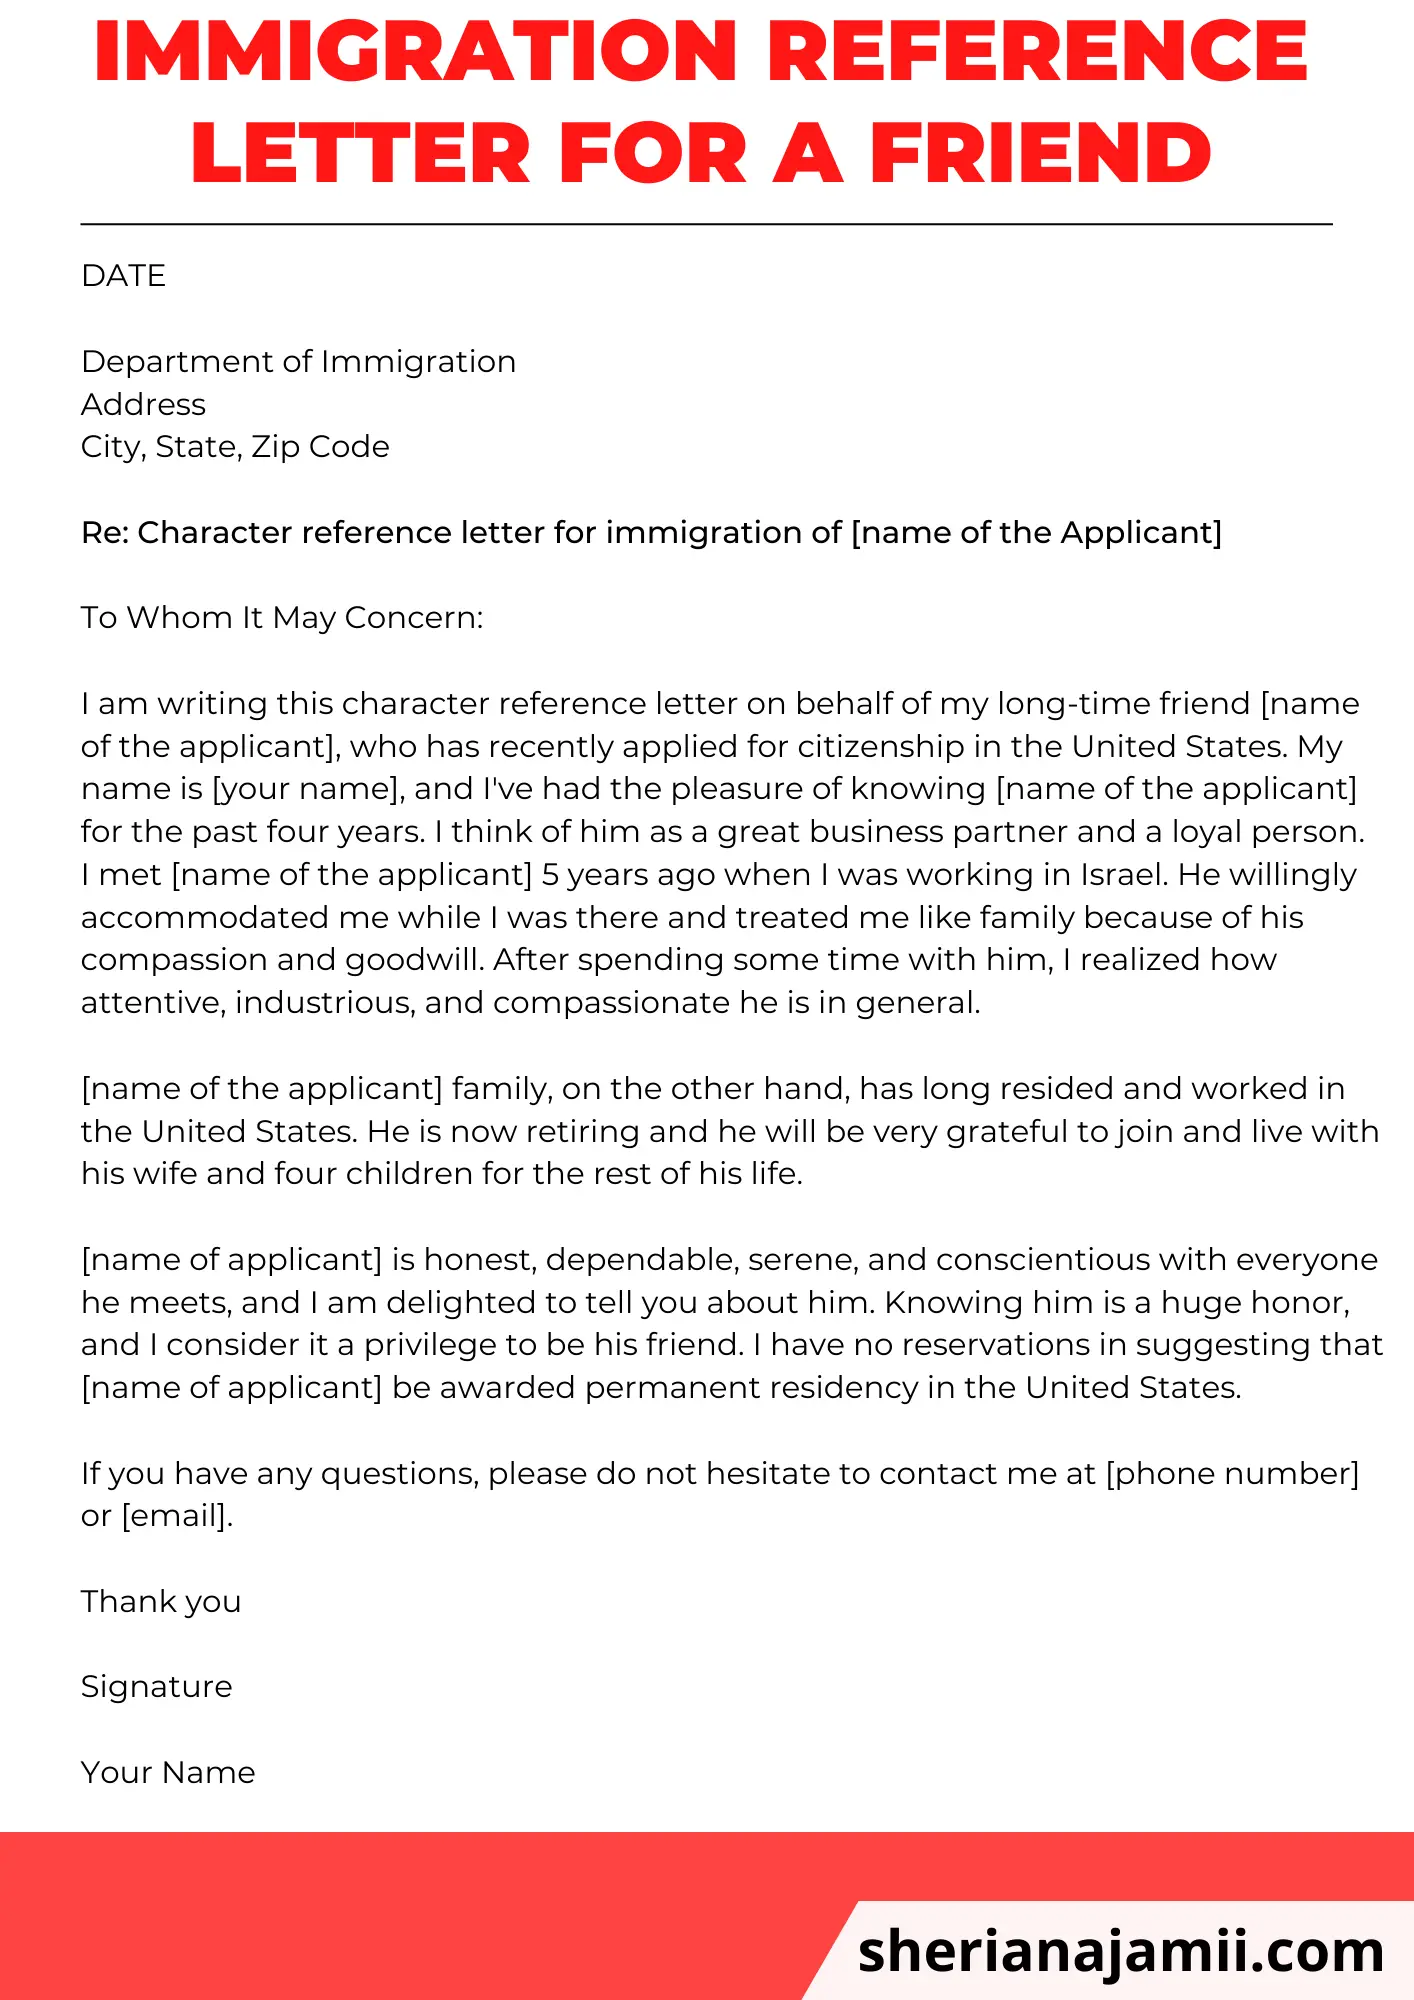 Immigration reference letter for a friend, immigration letter for a friend, sample immigration letter of support for a friend